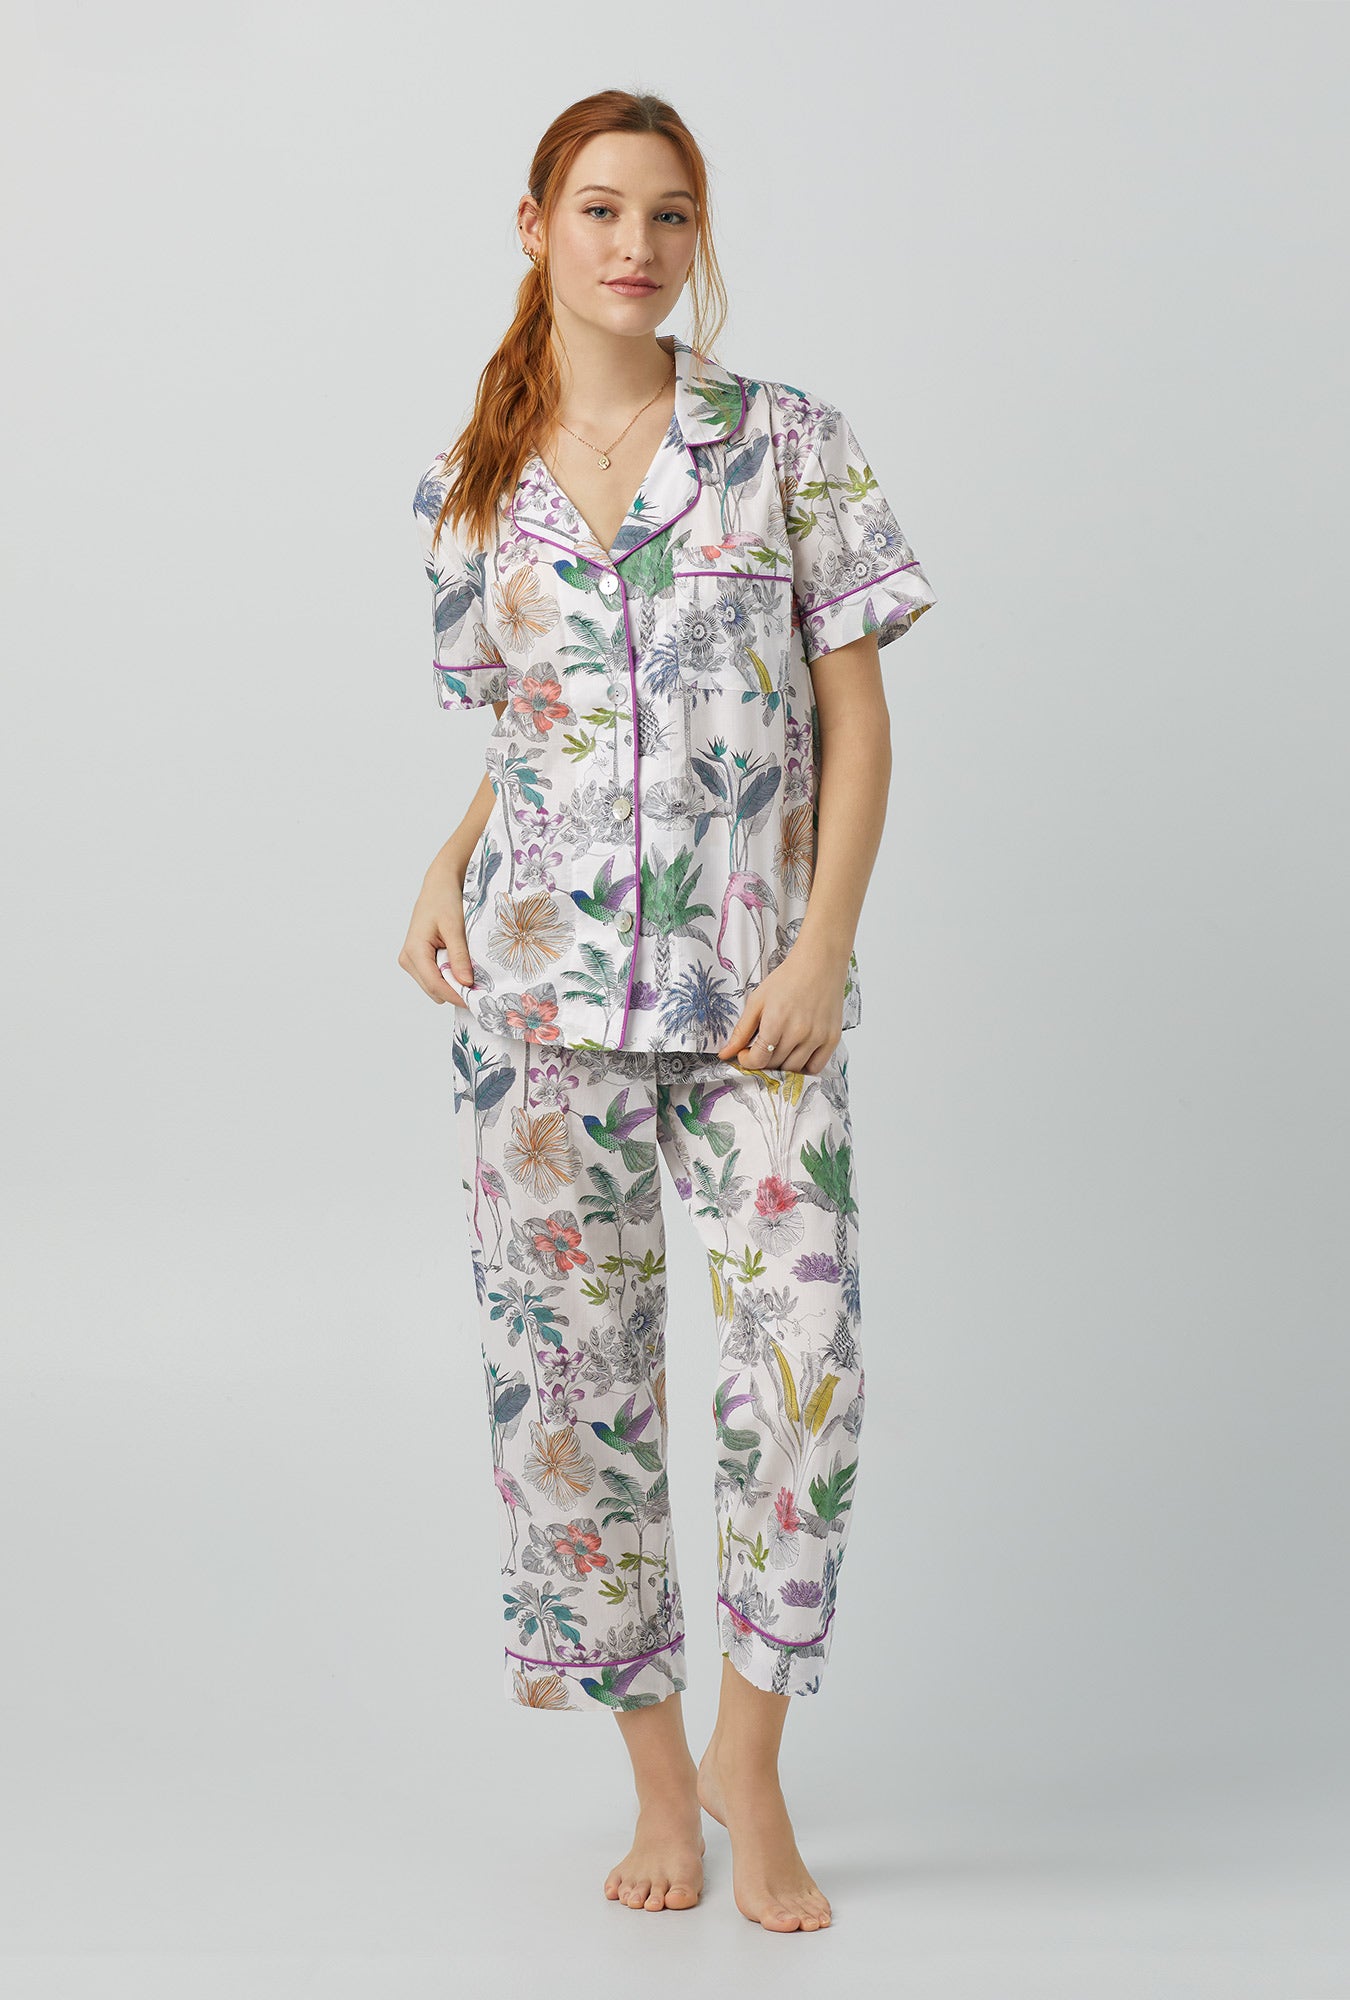 A lady wearing multi color Short Sleeve Classic Woven Cotton Cropped PJ Set with Darwin's Journey print